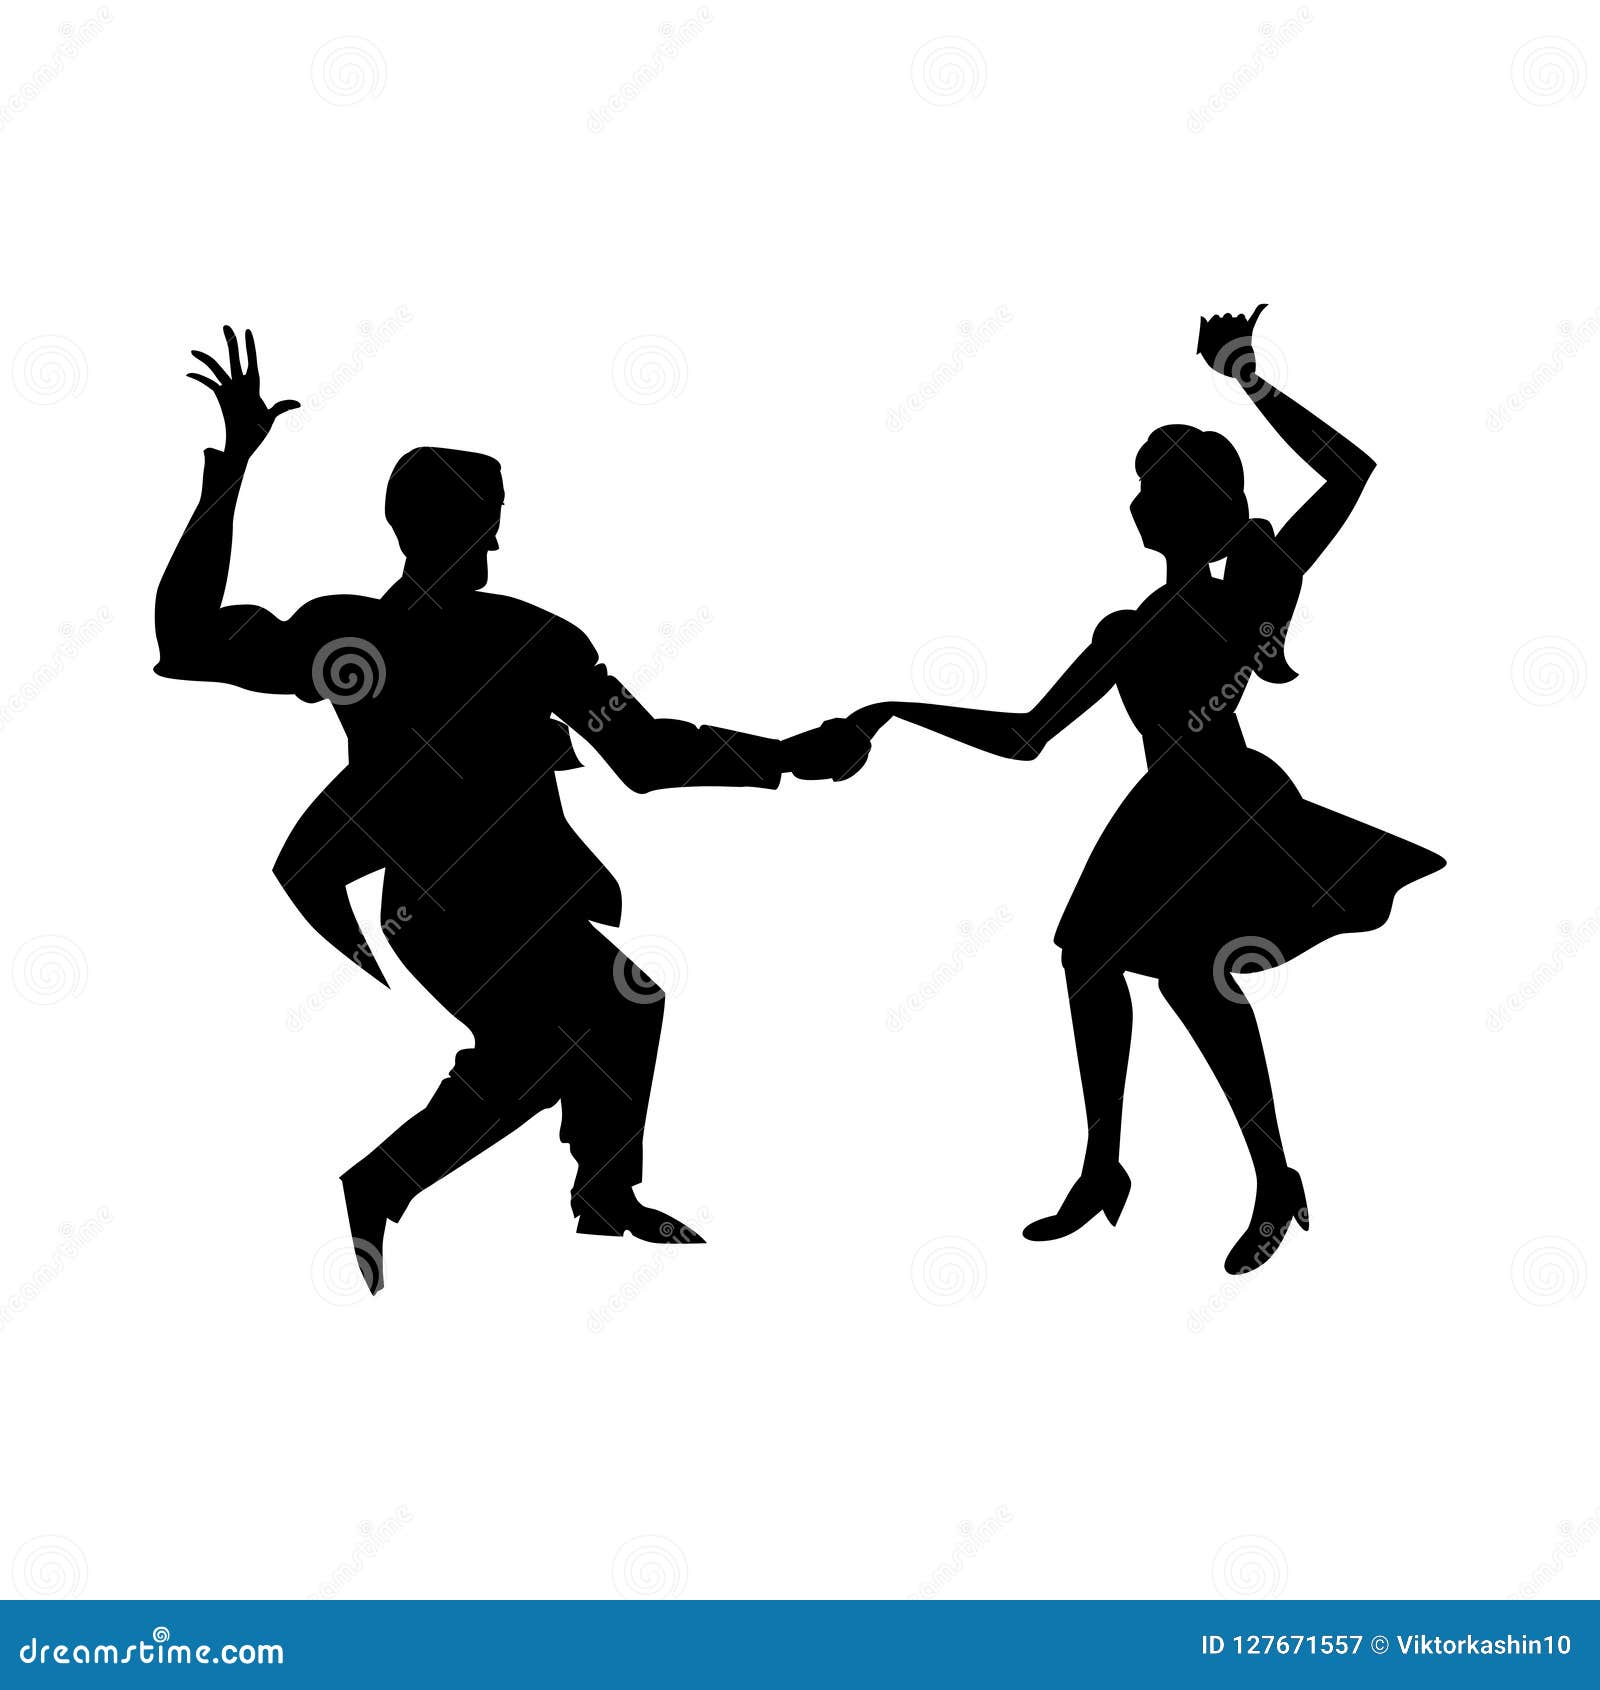 Silhouette Of Man And Woman Dancing A Swing Lindy Hop Social Dances Vector Illustration Stock Vector Illustration Of Poster Isolated 127671557 Vector illustration of couple dancing modern dance, partners dance bachata, dancing style design concept set, traditional dance flat icons isolated vector illustration, man and woman creative typography treatment in black and white. https www dreamstime com dance silhouette man woman dancing swing lindy hop social dances black white image isolated background vector image127671557